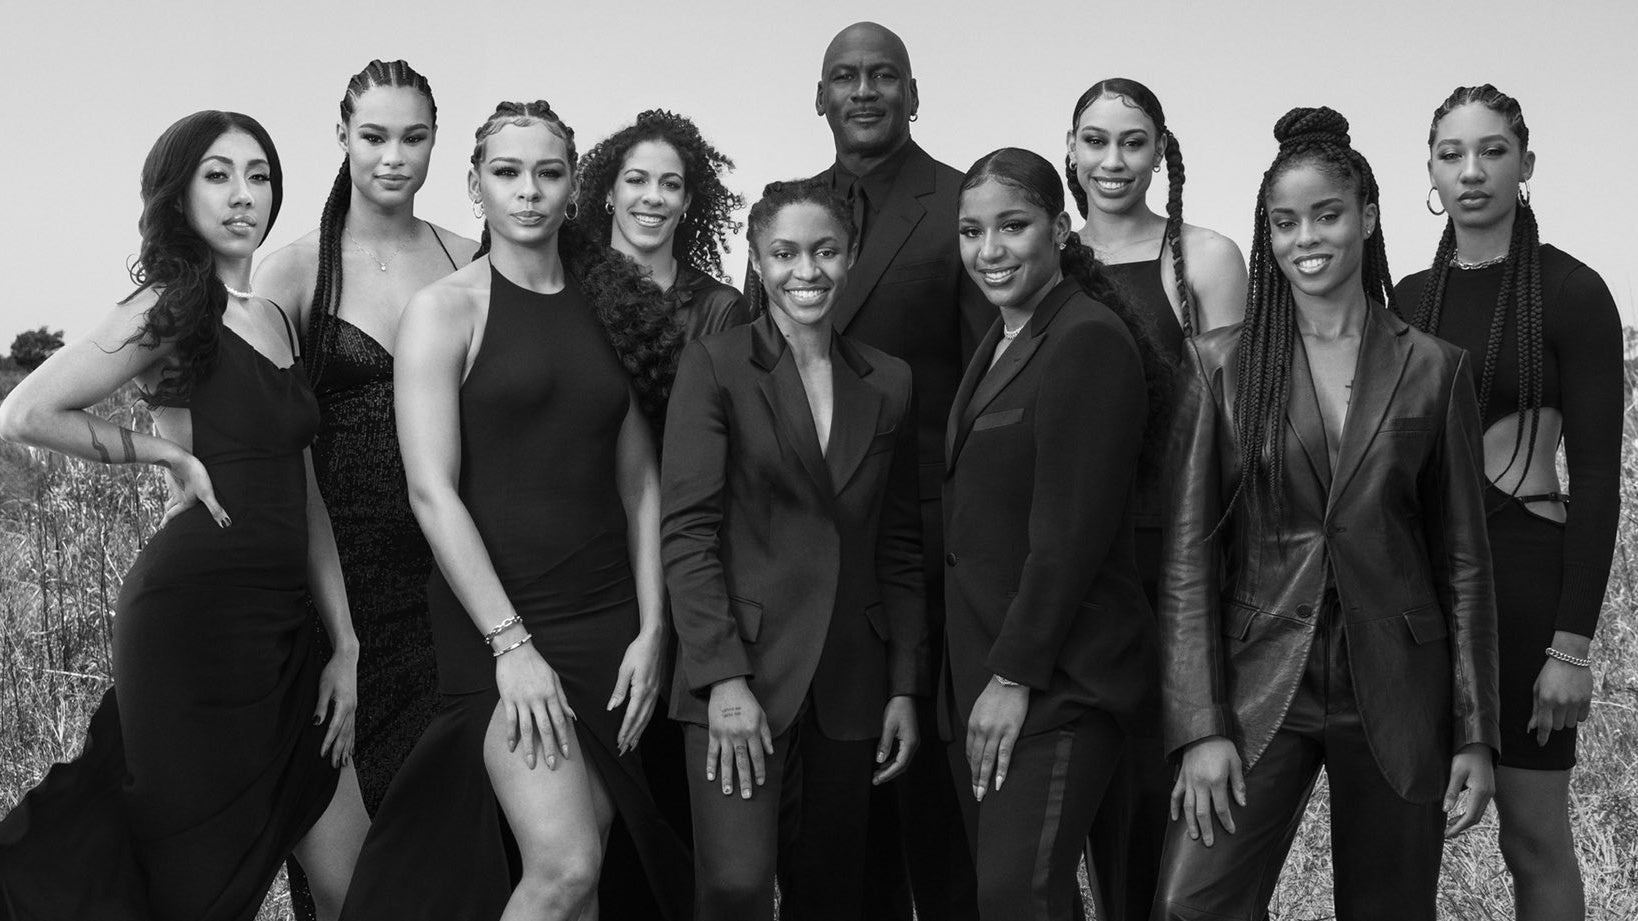 Jordan Brand Makes History With Largest Number Of WNBA Jumpman Endorsees